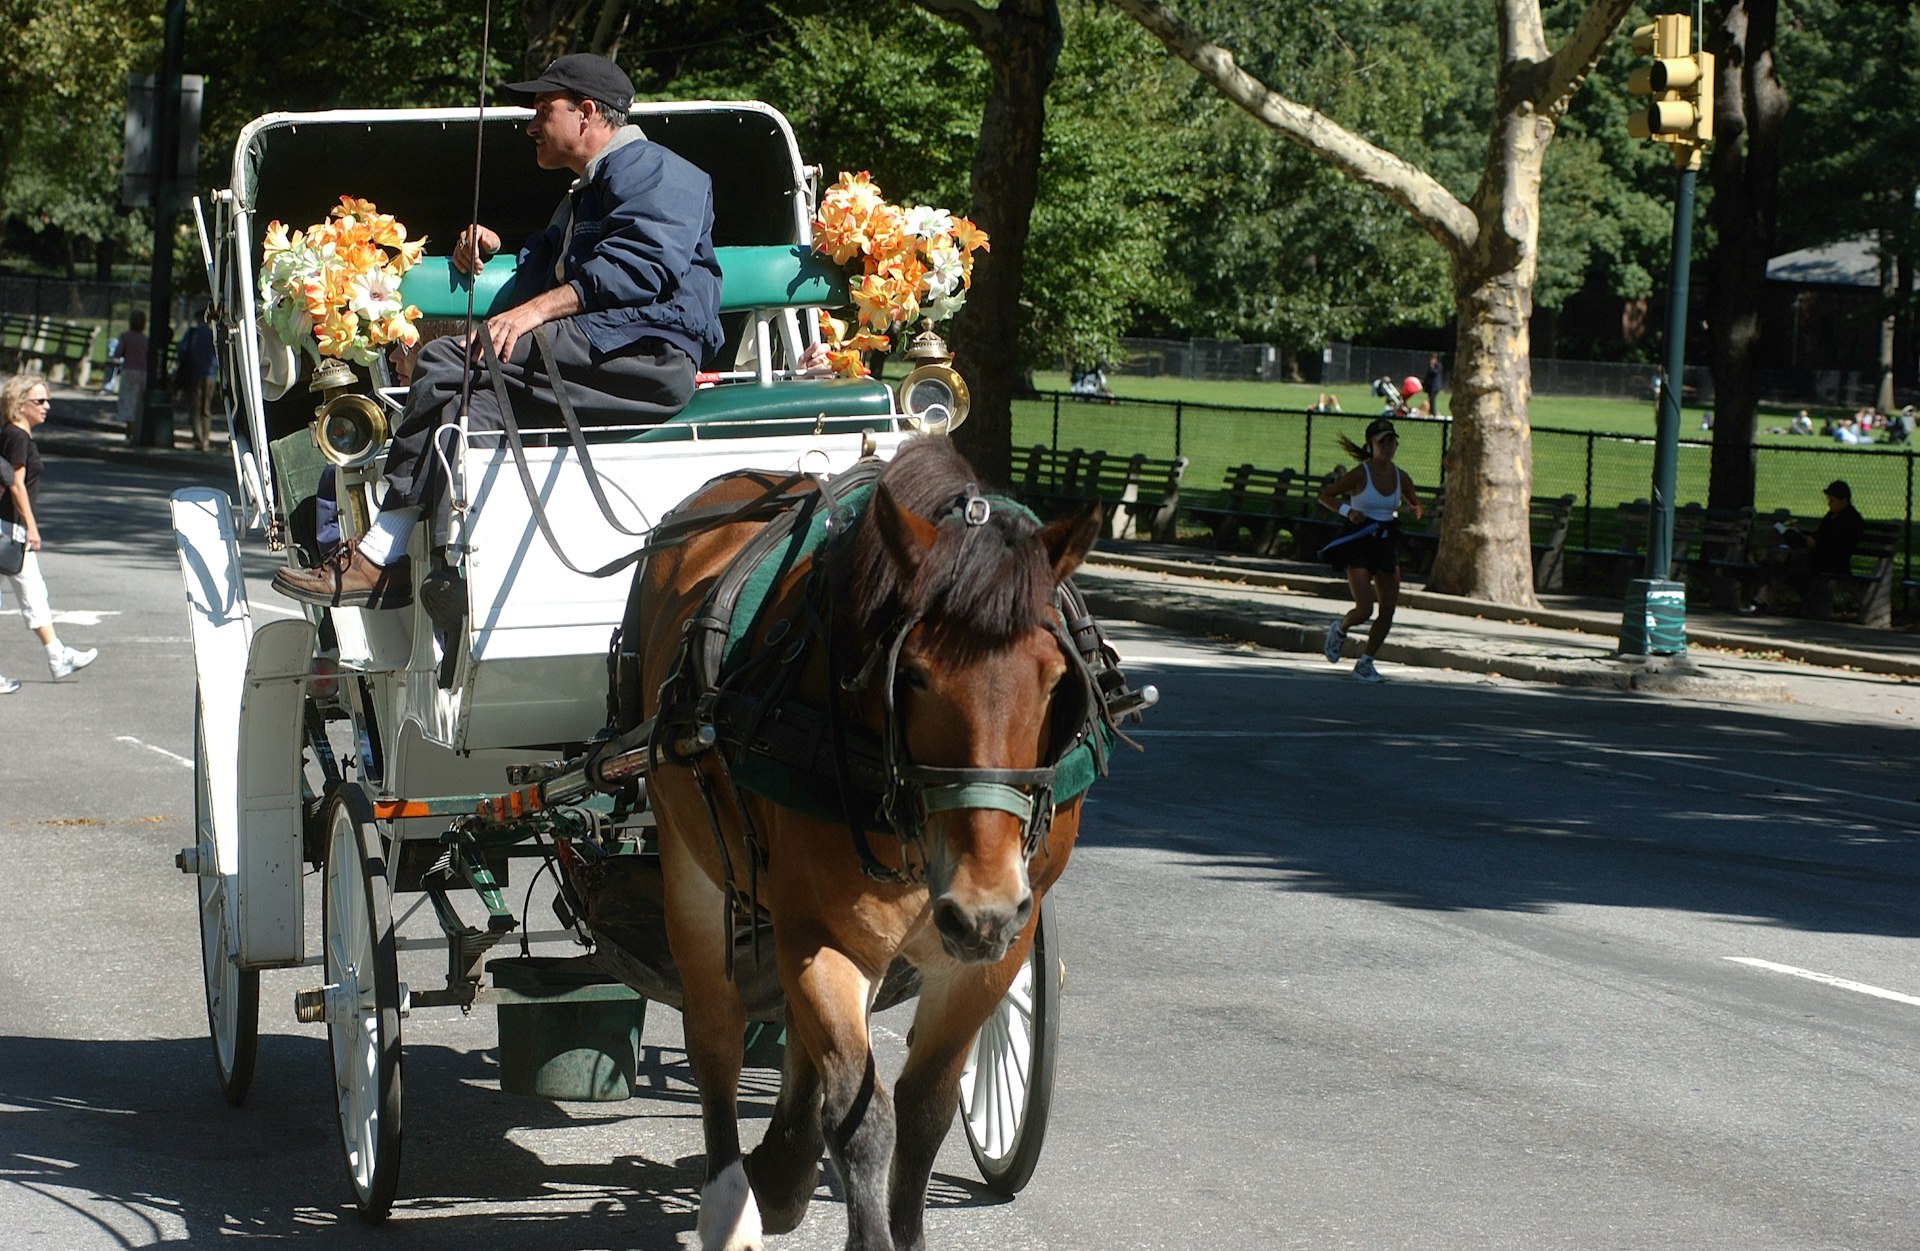 Horse-drawn carriage in Central Park, New York